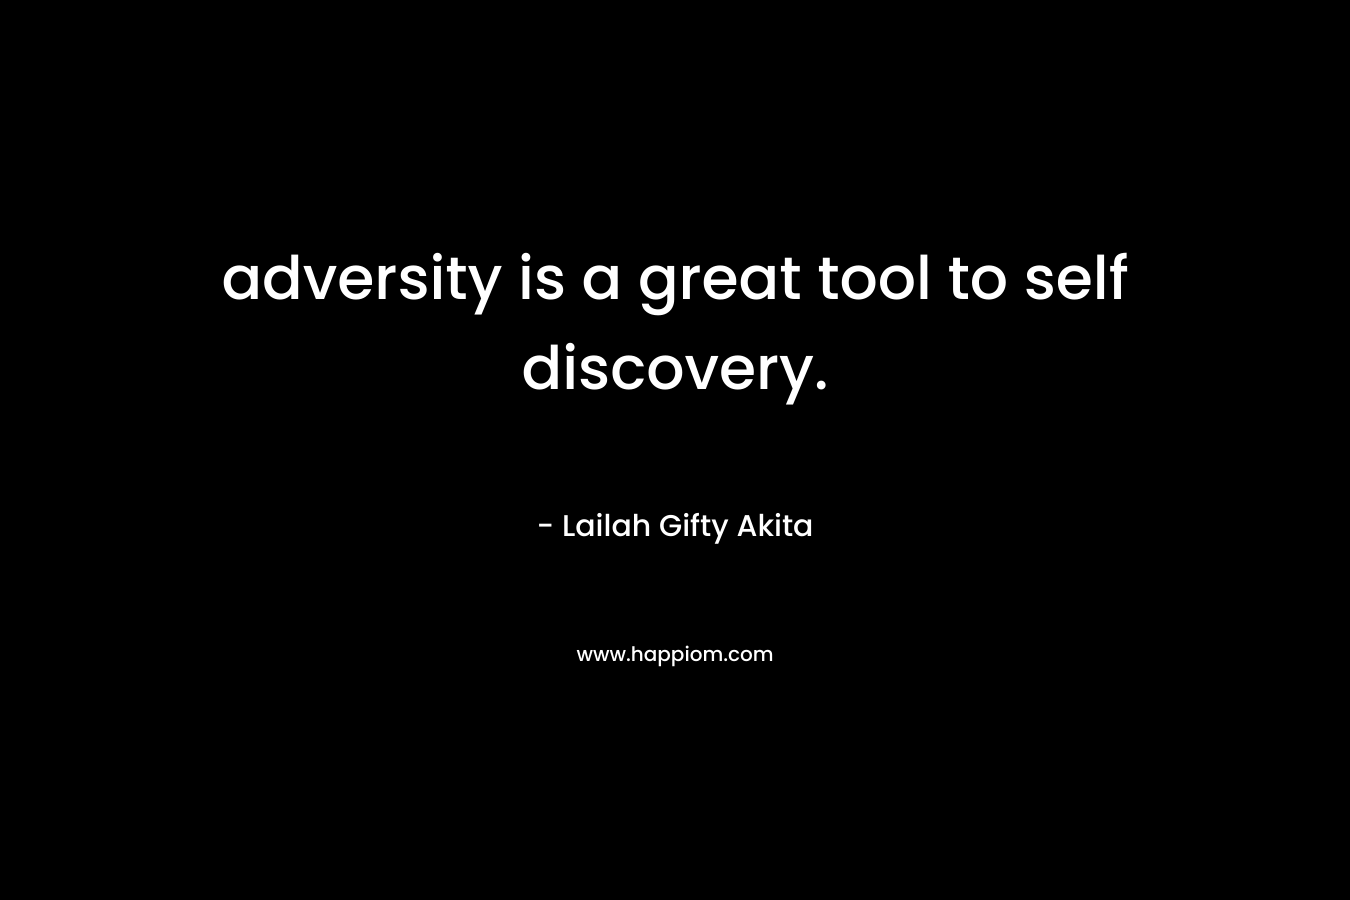 adversity is a great tool to self discovery.